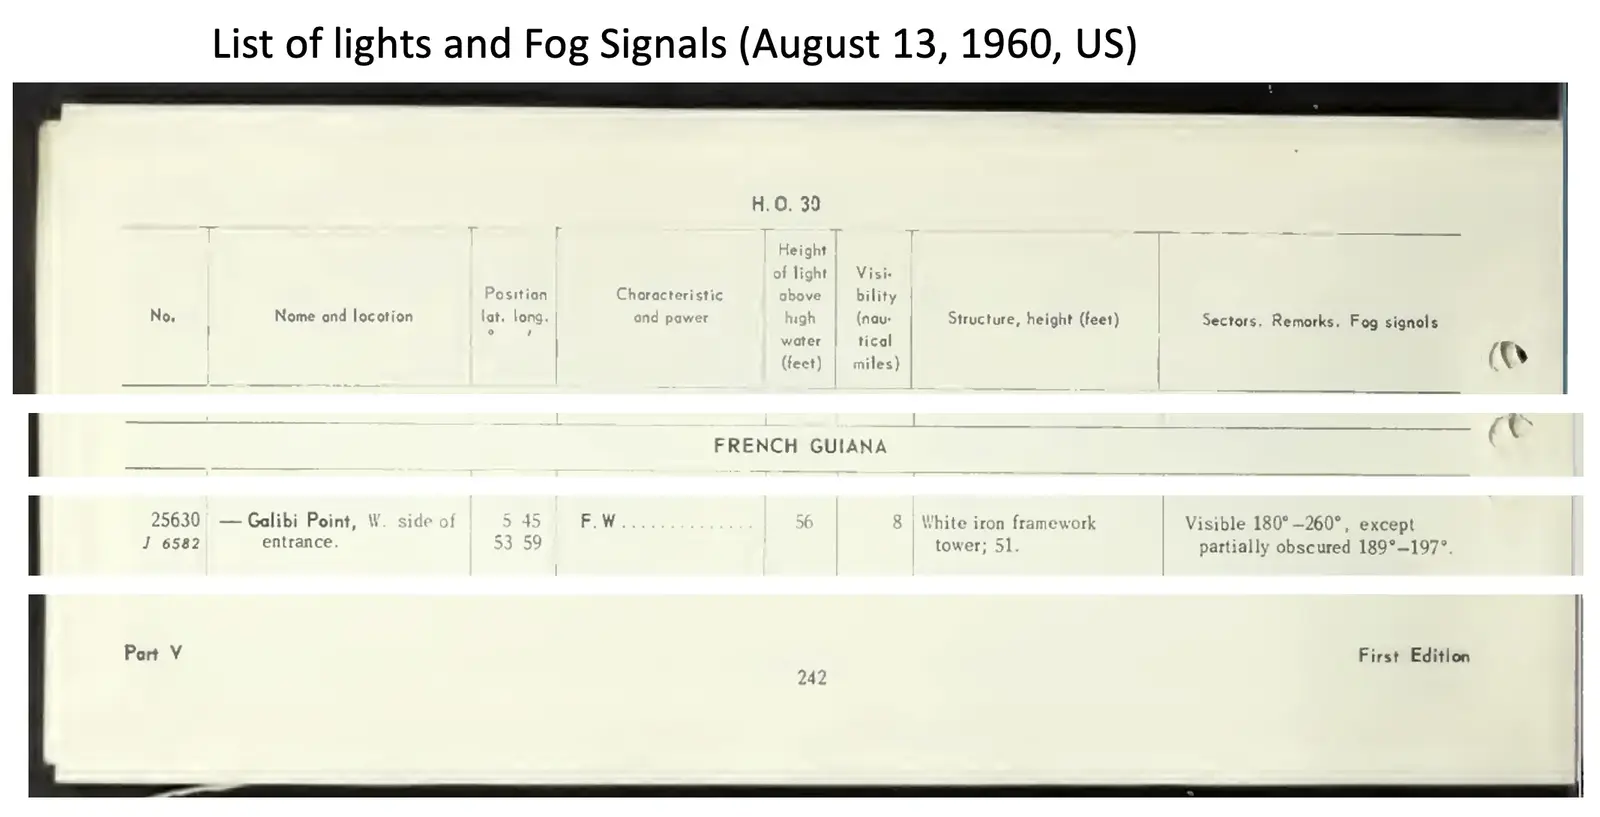 List of lights and Fog Signals (August 13, 1960, US)